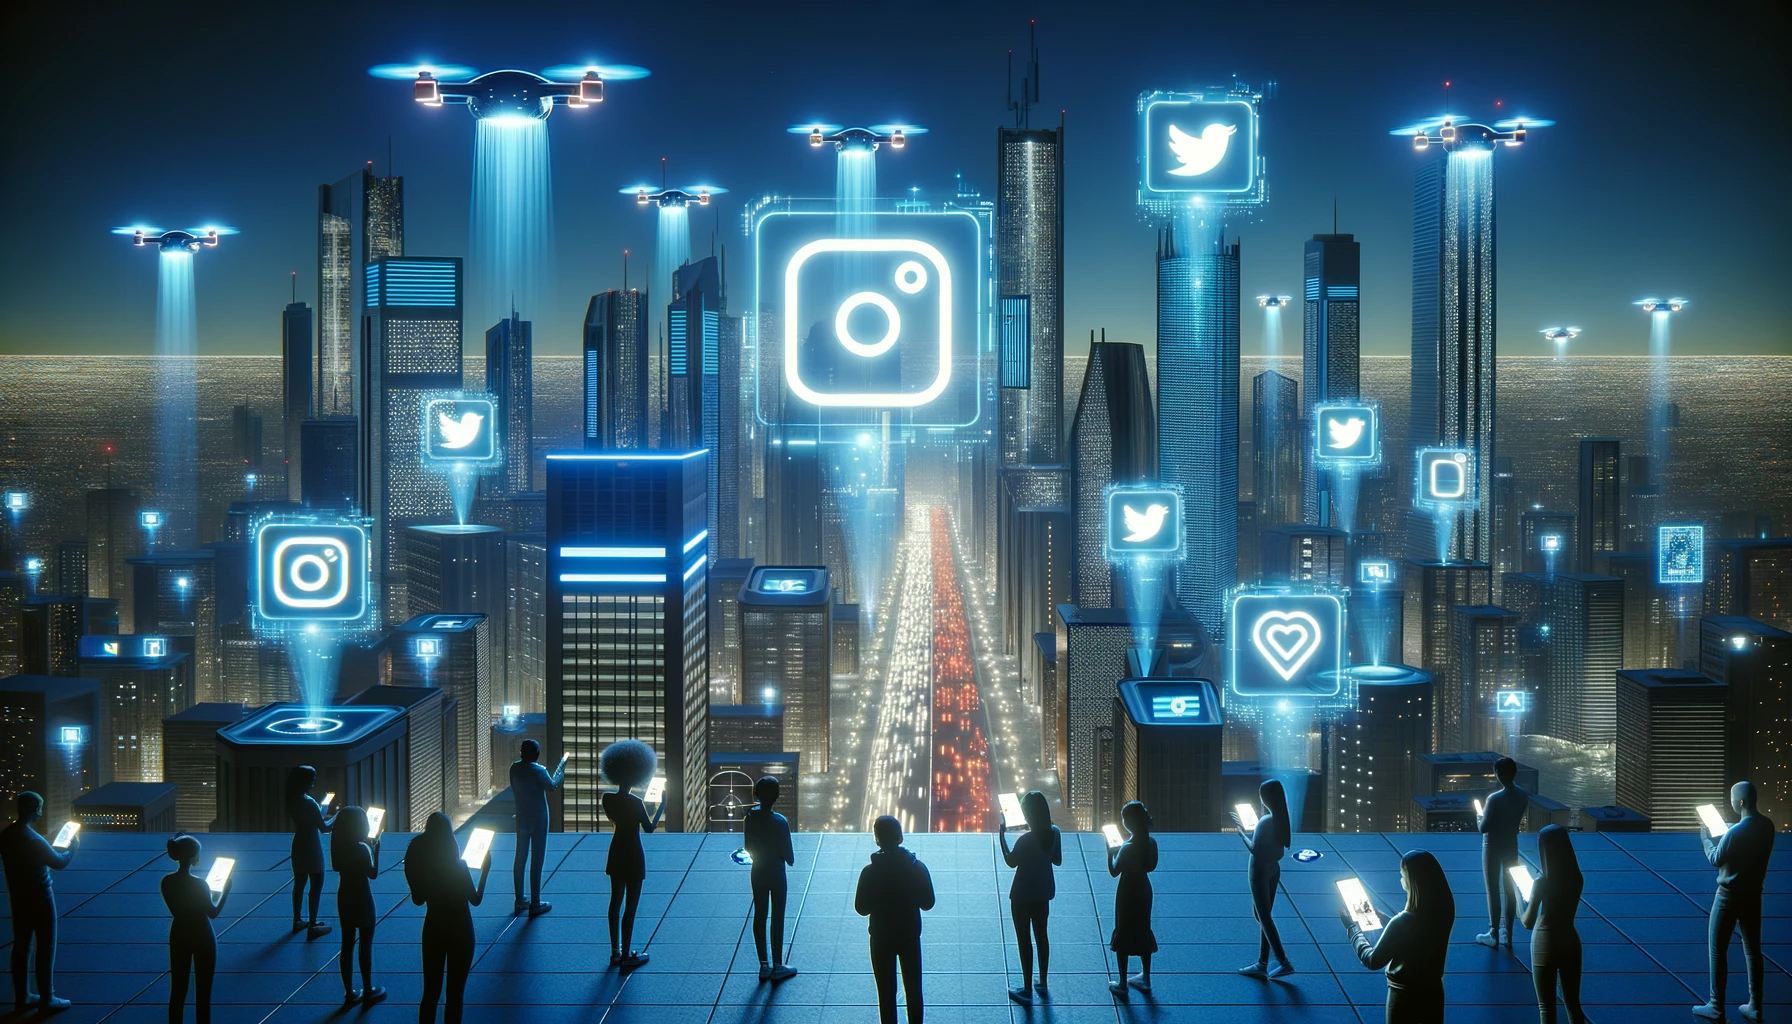 Photo of a sleek, blue-toned futuristic cityscape at night with neon billboards promoting Instagram.